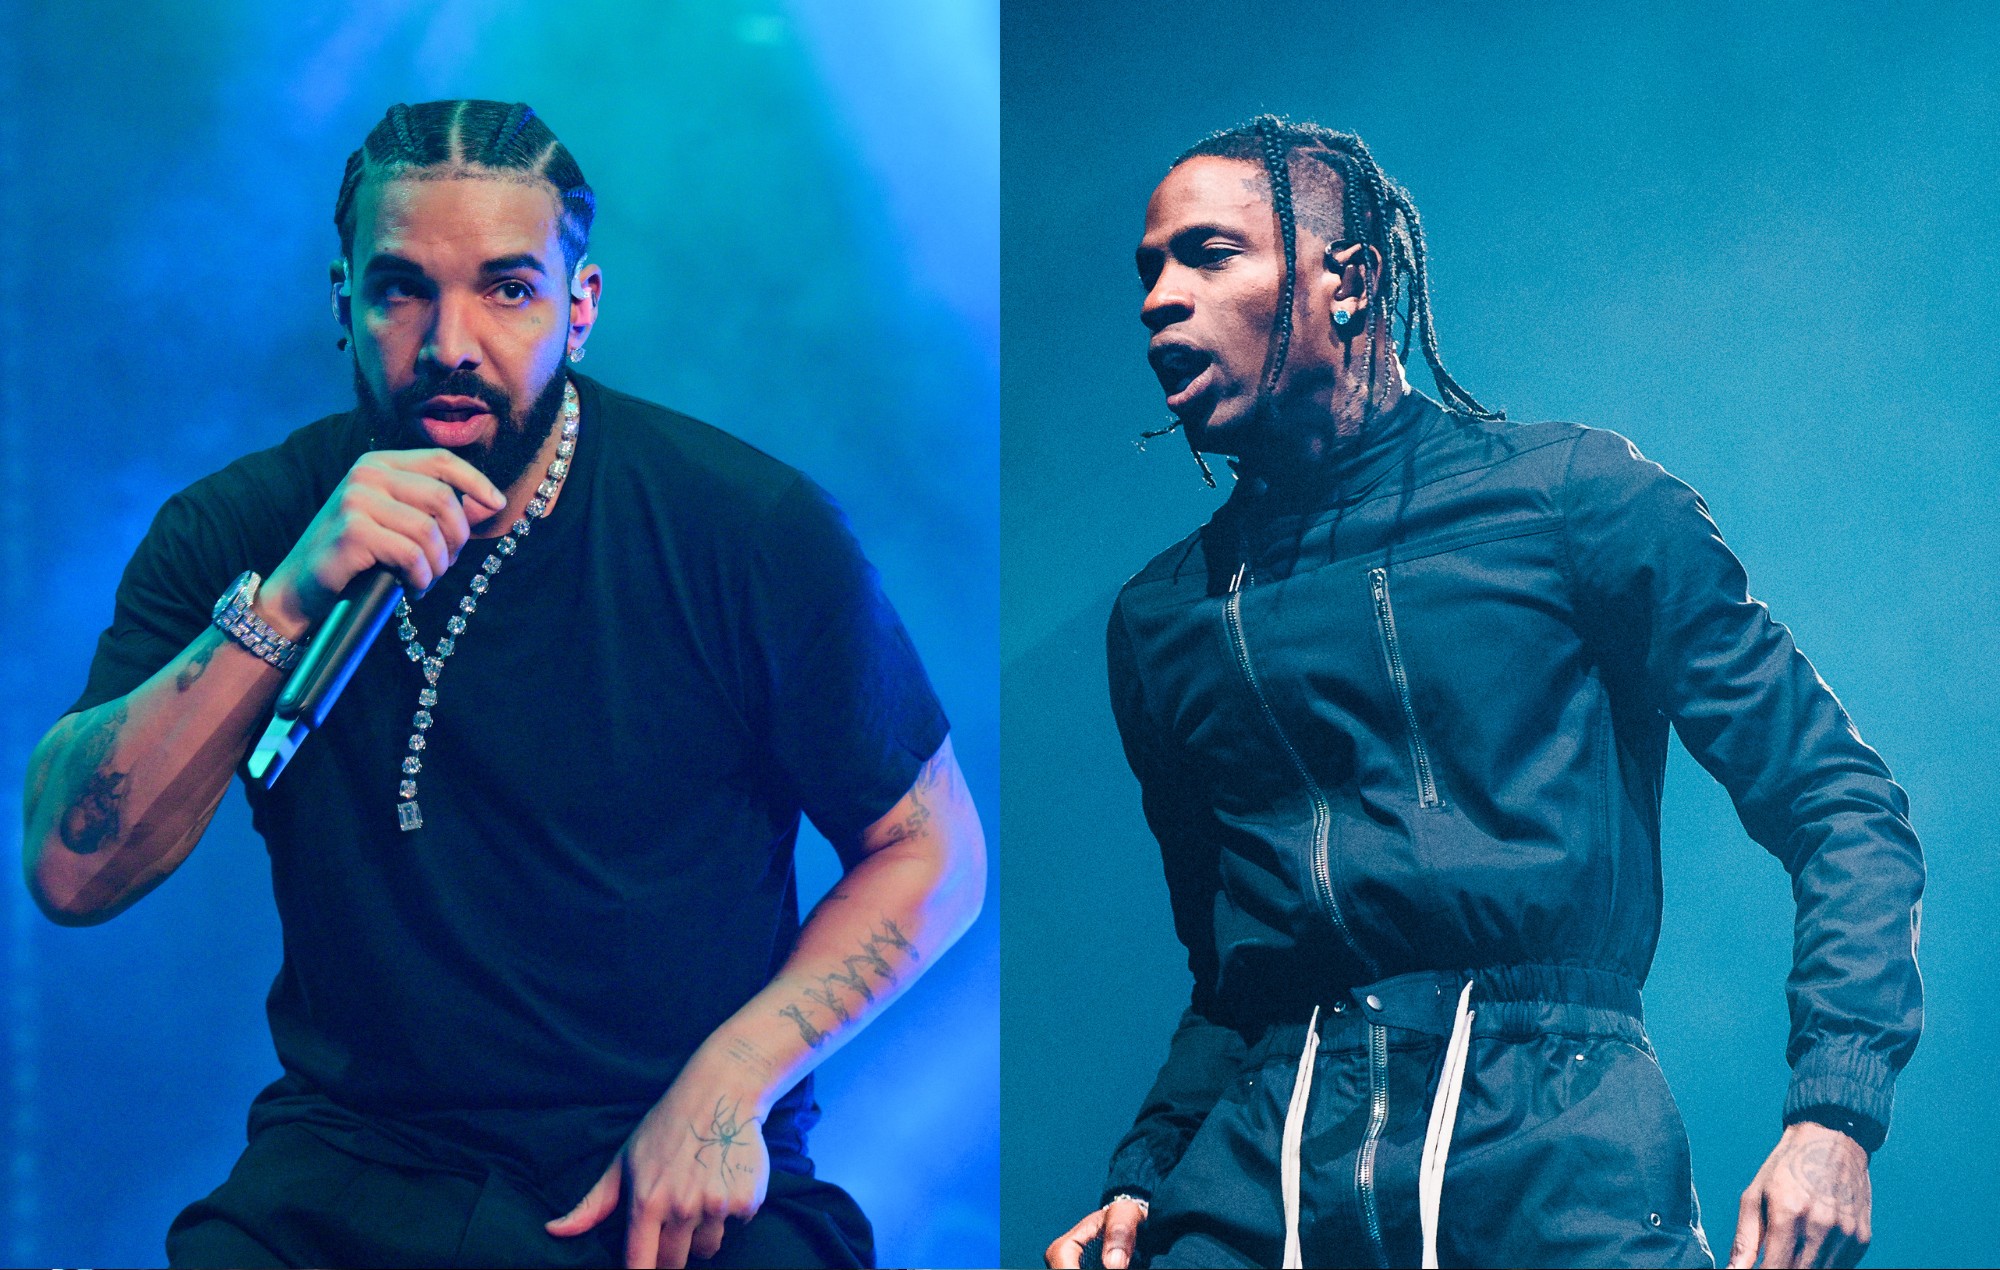 Rumors about Drake and Travis Scott Feud emerged after the concert incident